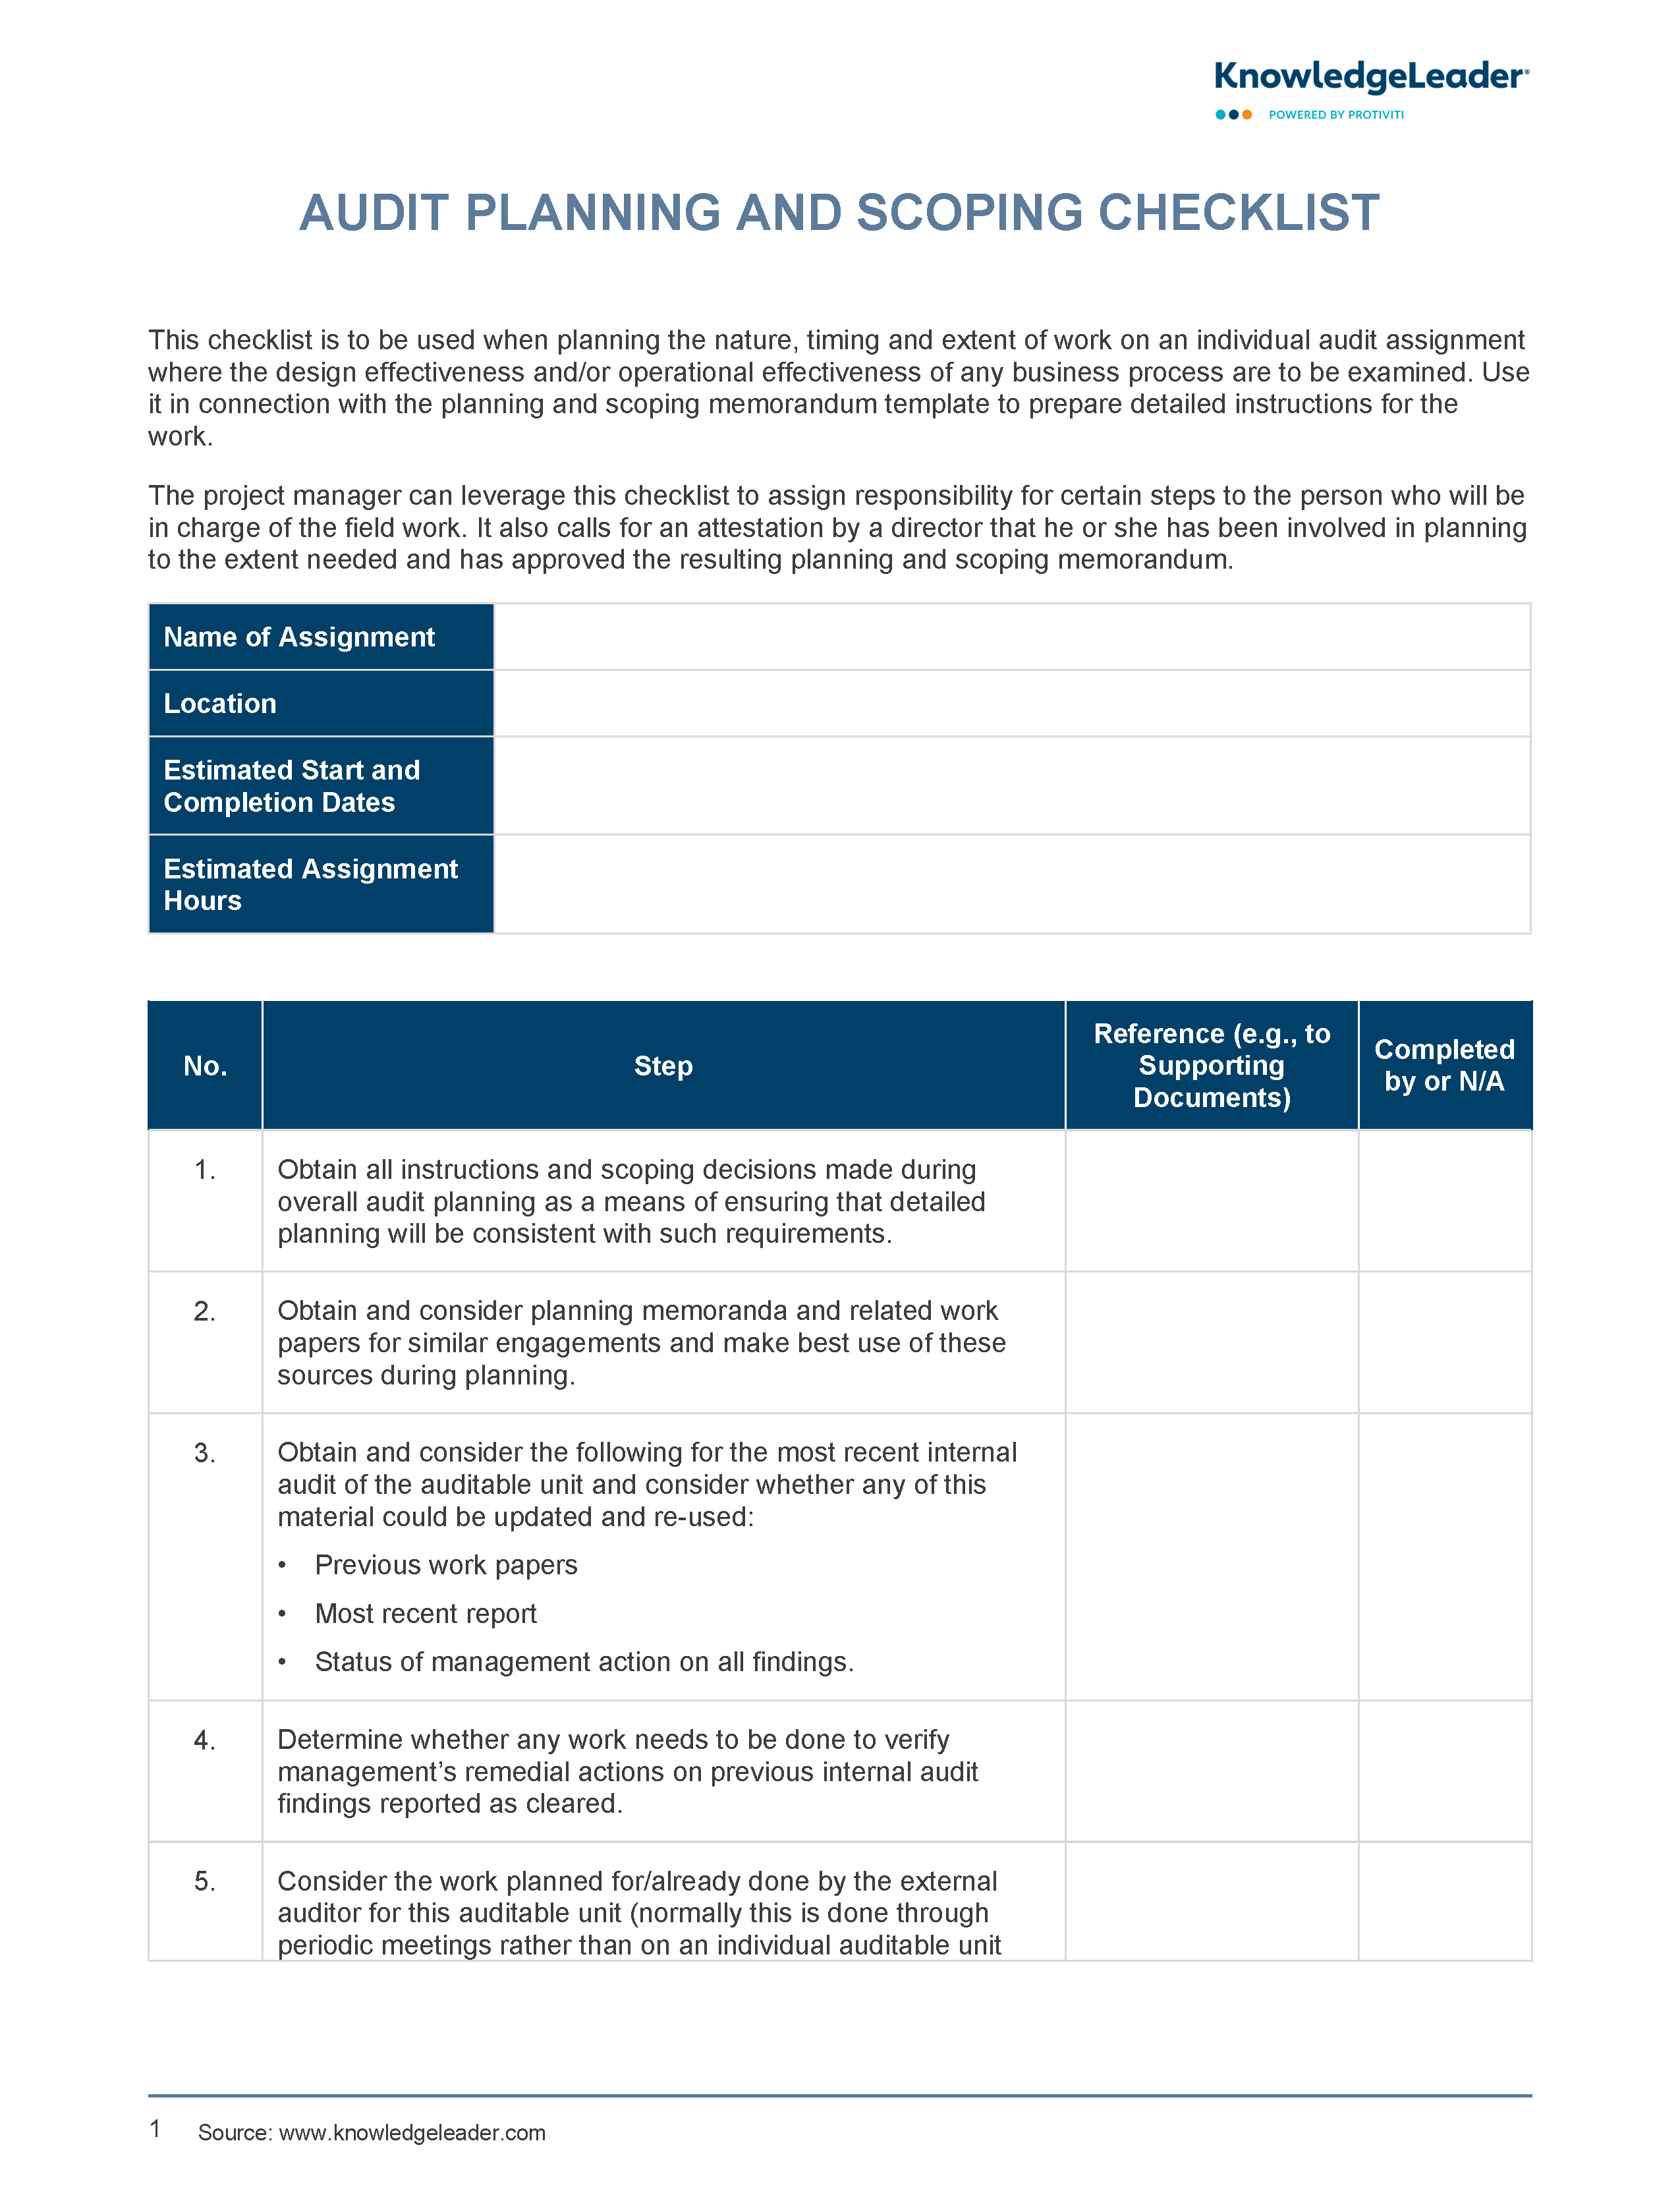 Screenshot of the first page of Audit Planning and Scoping Checklist.